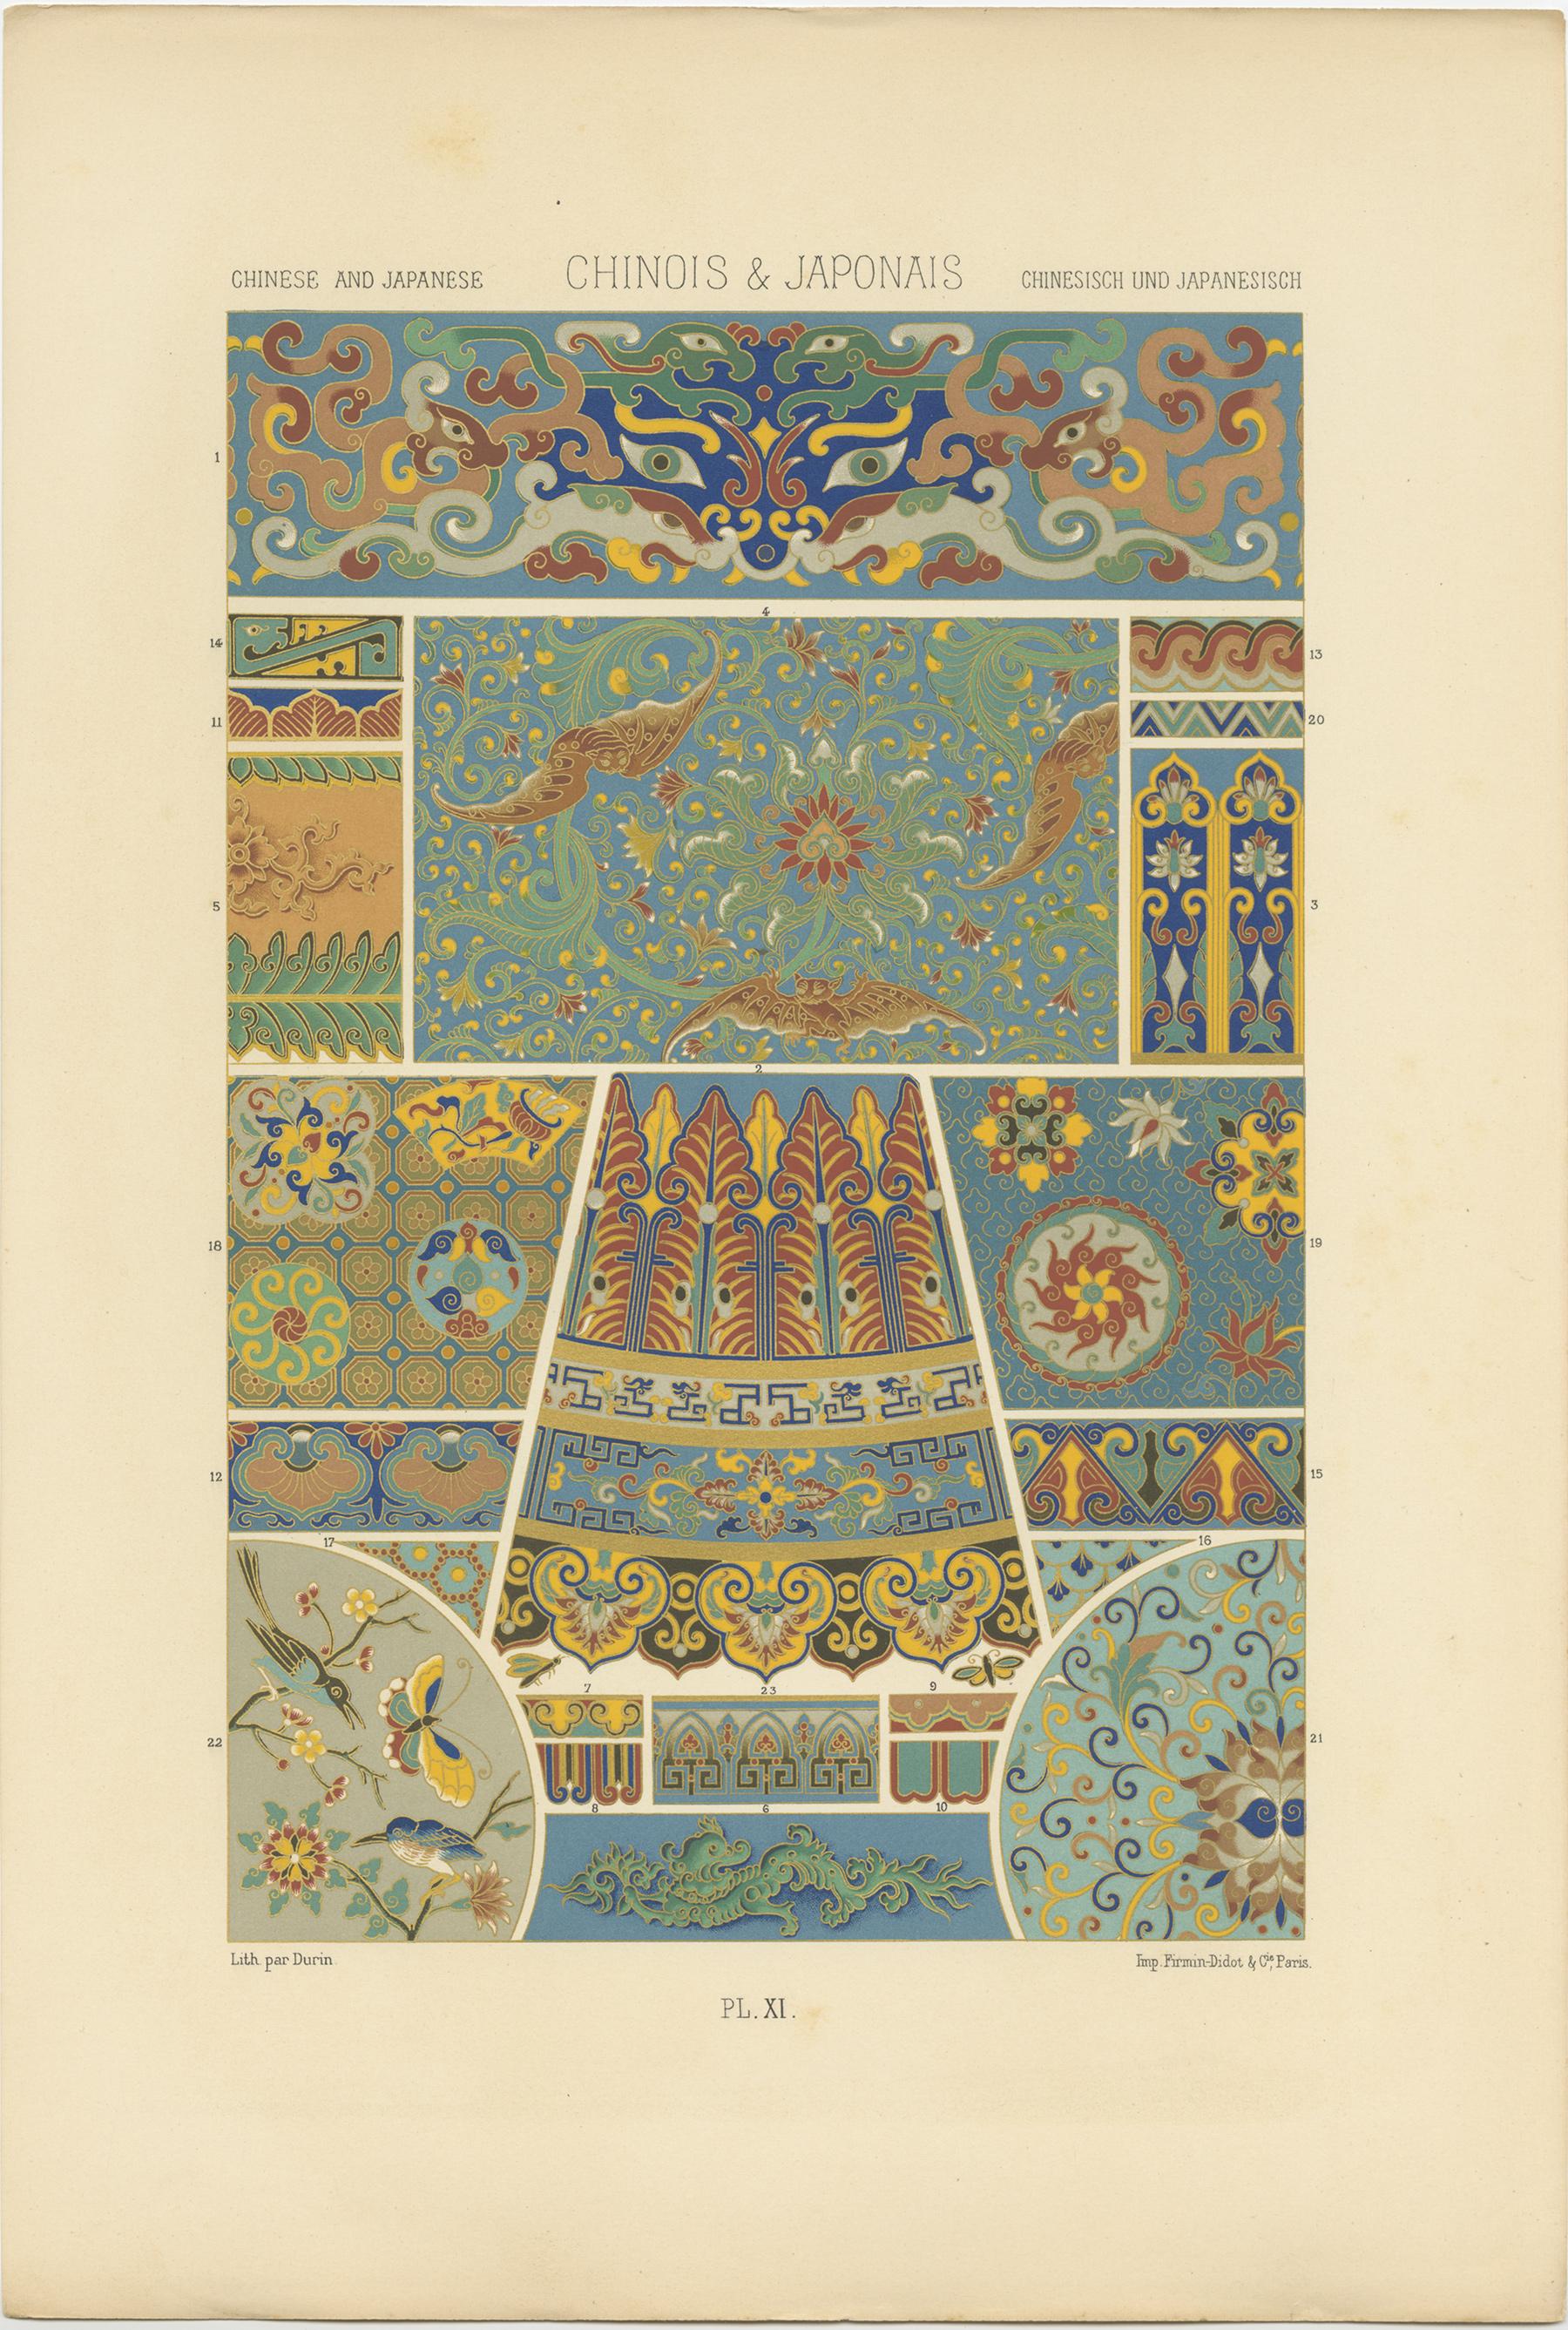 Antique print titled 'Chinese and Japanese - Chinois & Japonais - Chinesisch und Japanesisch'. Chromolithograph of Chinese and Japanese ornaments and decorative arts. This print originates from 'l'Ornement Polychrome' by Auguste Racinet. Published